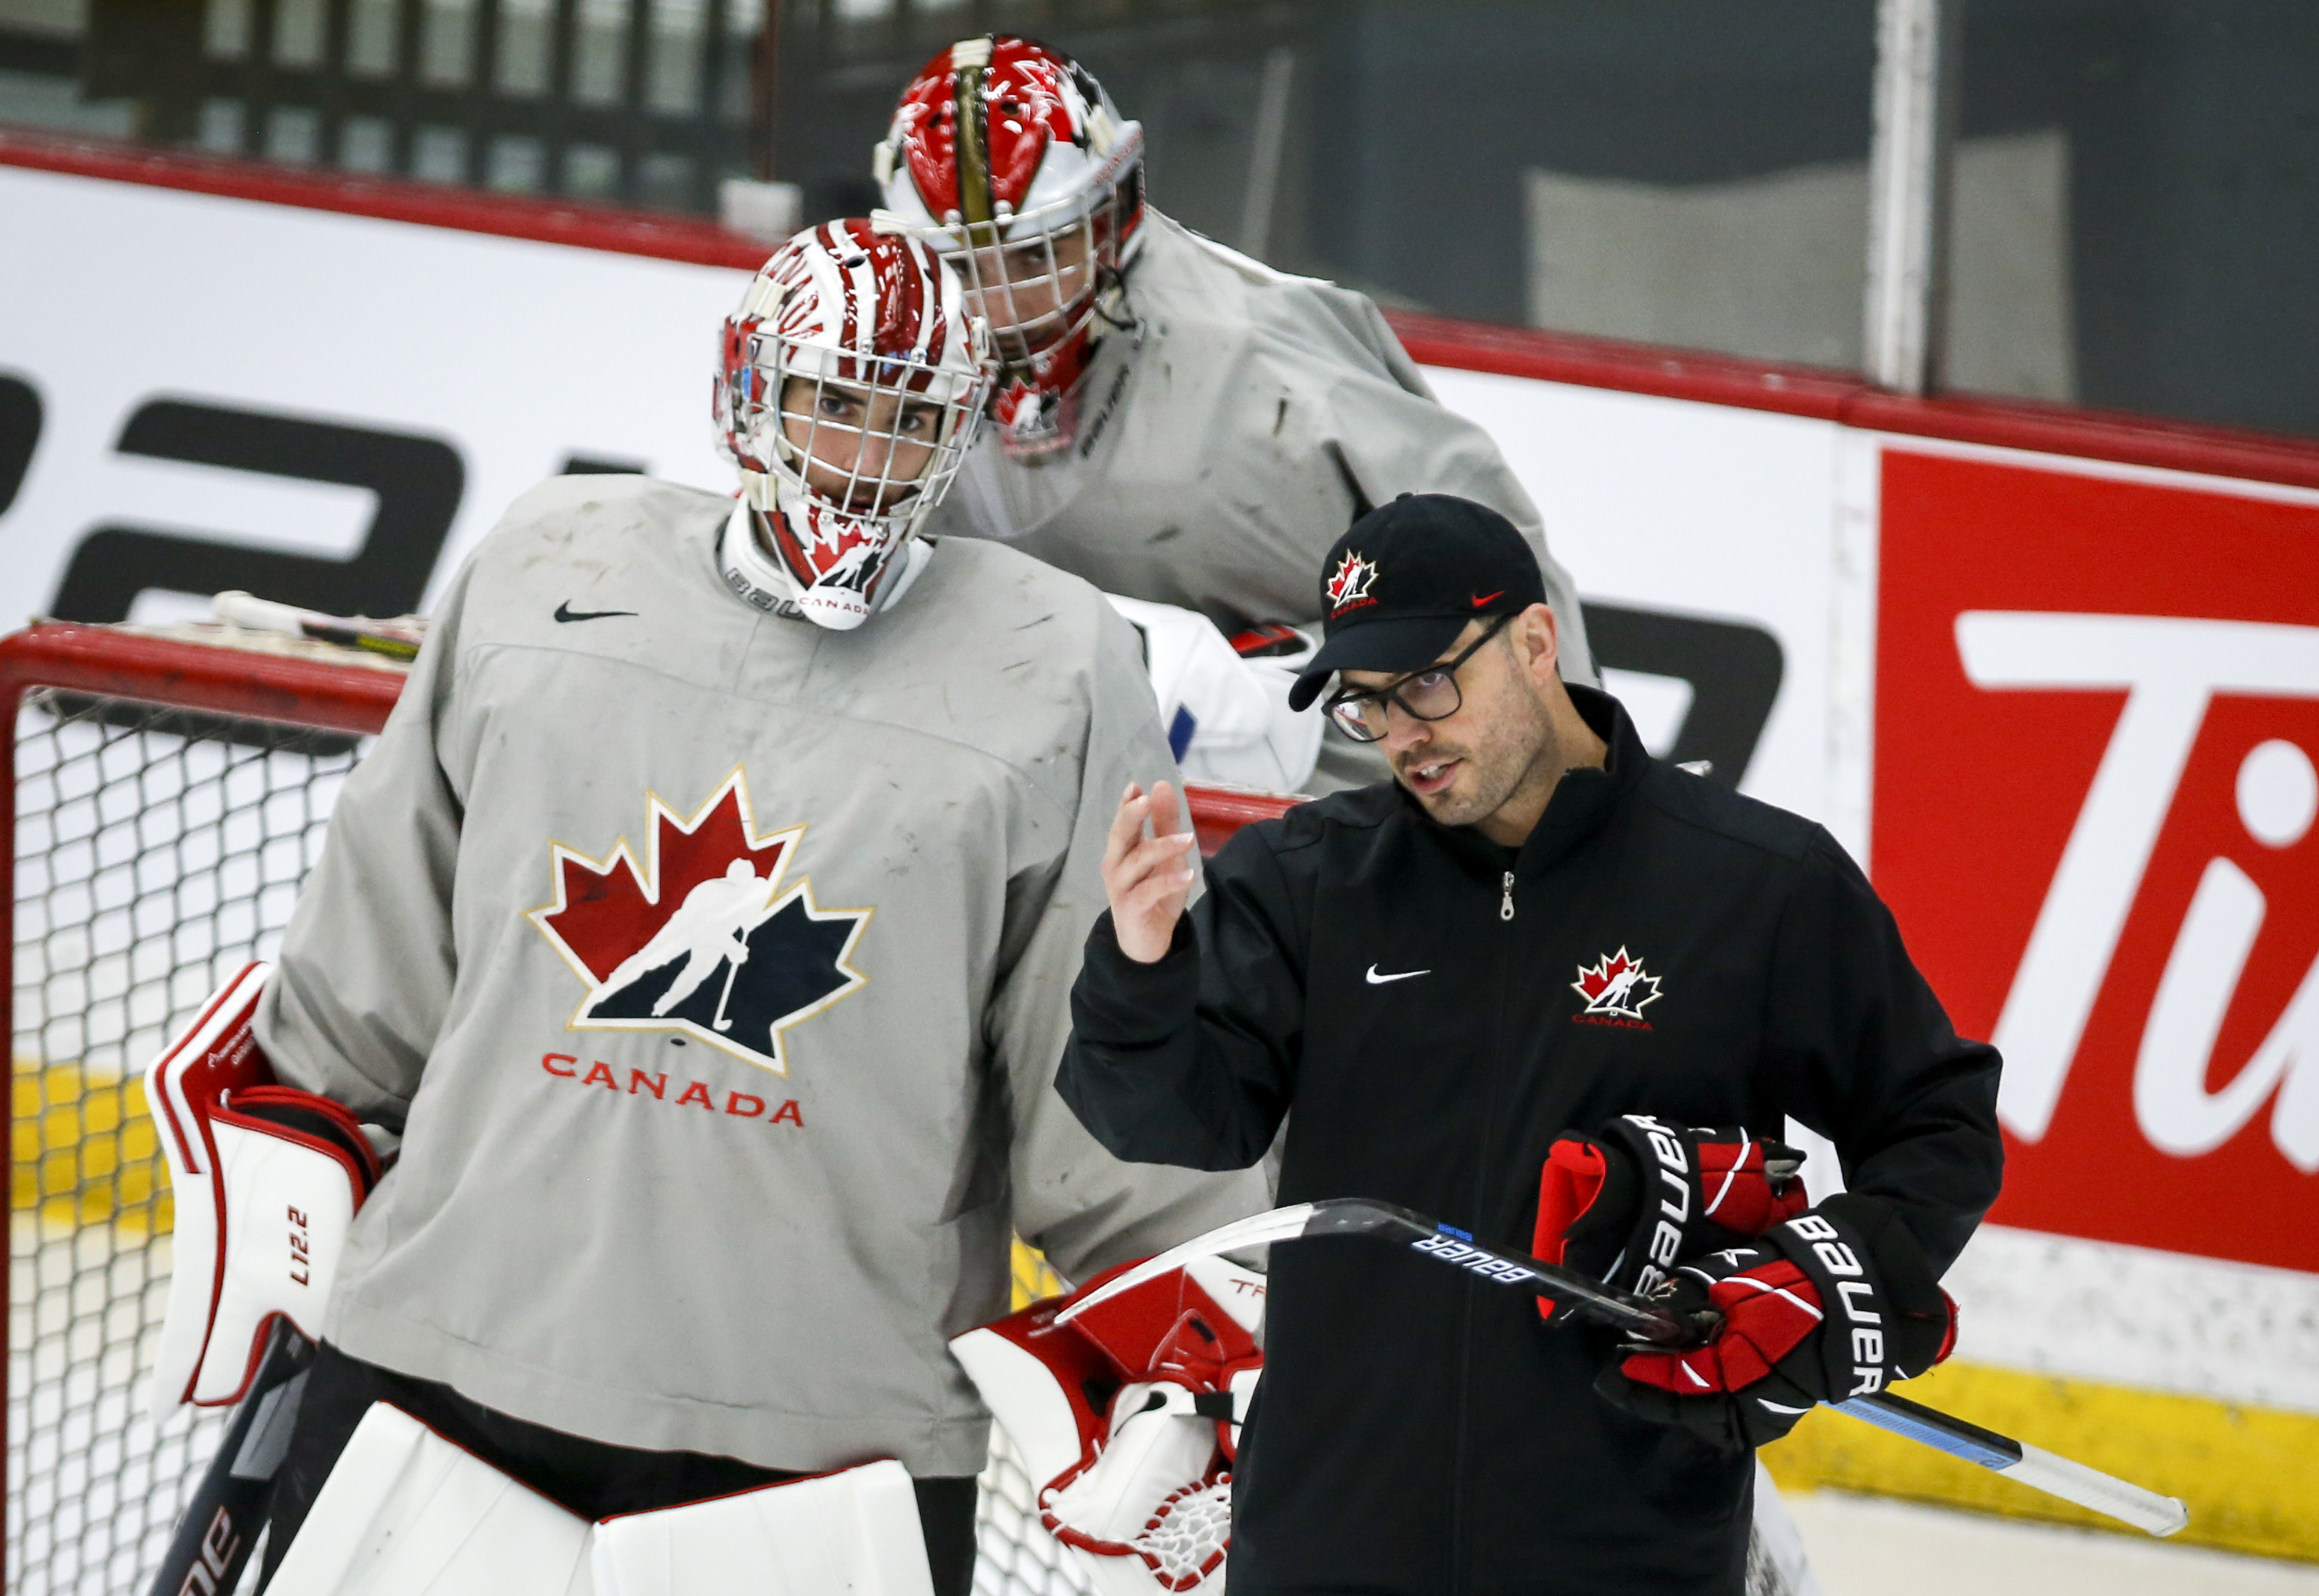 20 years after playing in world juniors, Canadian goaltender comes full circle as coach Globalnews.ca